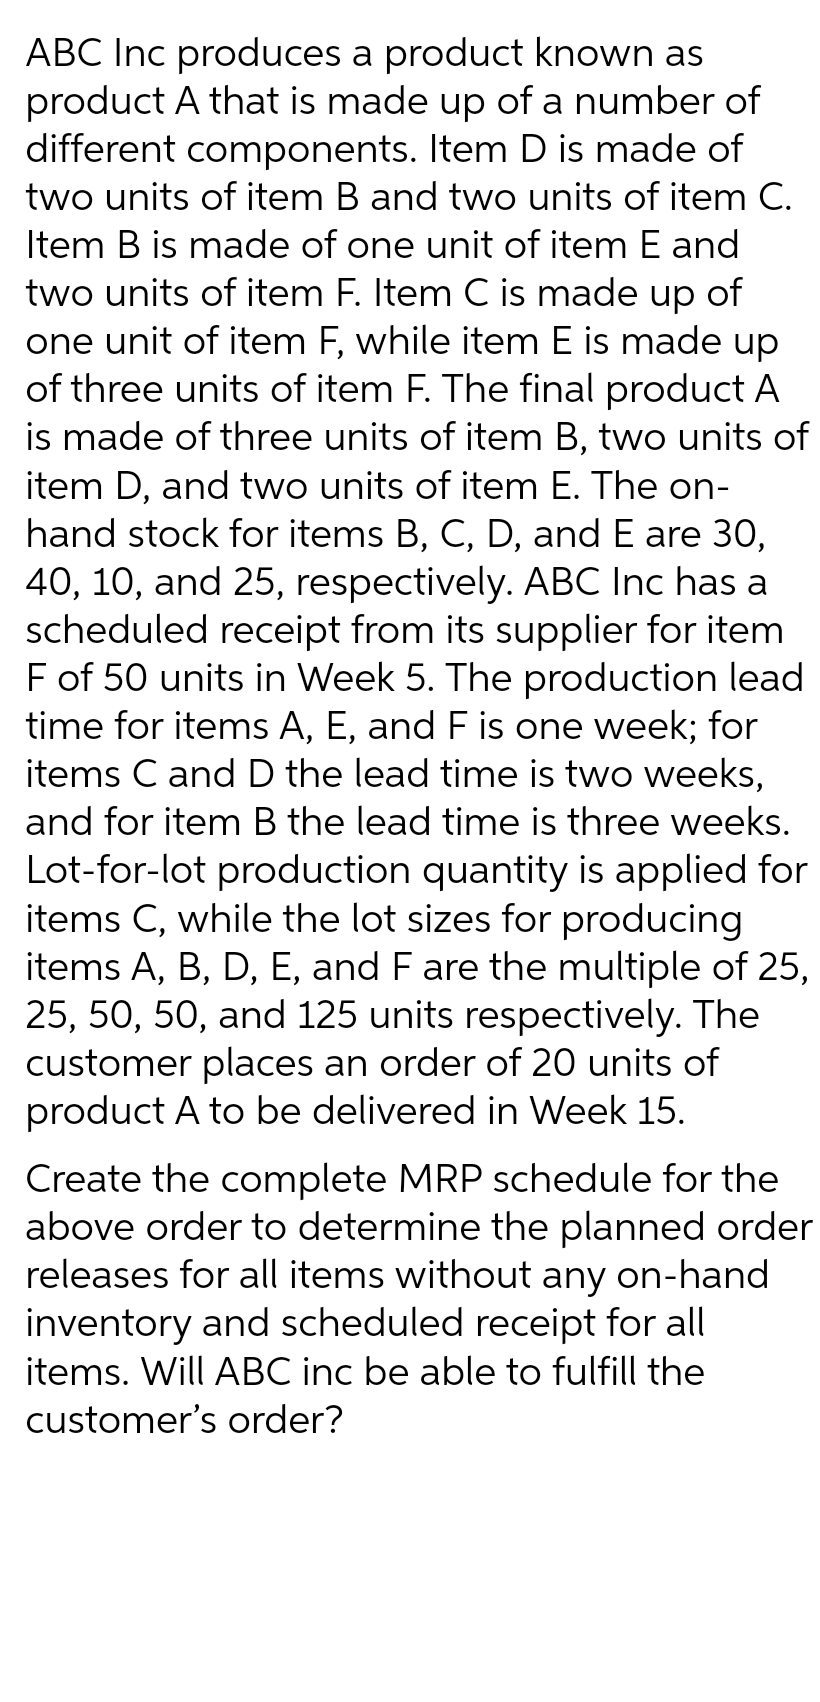 ABC Inc produces a product known as
product A that is made up of a number of
different components. Item D is made of
two units of item B and two units of item C.
Item B is made of one unit of item E and
two units of item F. Item C is made up of
one unit of item F, while item E is made up
of three units of item F. The final product A
is made of three units of item B, two units of
item D, and two units of item E. The on-
hand stock for items B, C, D, and E are 30,
40, 10, and 25, respectively. ABC Inc has a
scheduled receipt from its supplier for item
F of 50 units in Week 5. The production lead
time for items A, E, and F is one week; for
items C and D the lead time is two weeks,
and for item B the lead time is three weeks.
Lot-for-lot production quantity is applied for
items C, while the lot sizes for producing
items A, B, D, E, and F are the multiple of 25,
25, 50, 50, and 125 units respectively. The
customer places an order of 20 units of
product A to be delivered in Week 15.
Create the complete MRP schedule for the
above order to determine the planned order
releases for all items without any on-hand
inventory and scheduled receipt for all
items. Will ABC inc be able to fulfill the
customer's order?